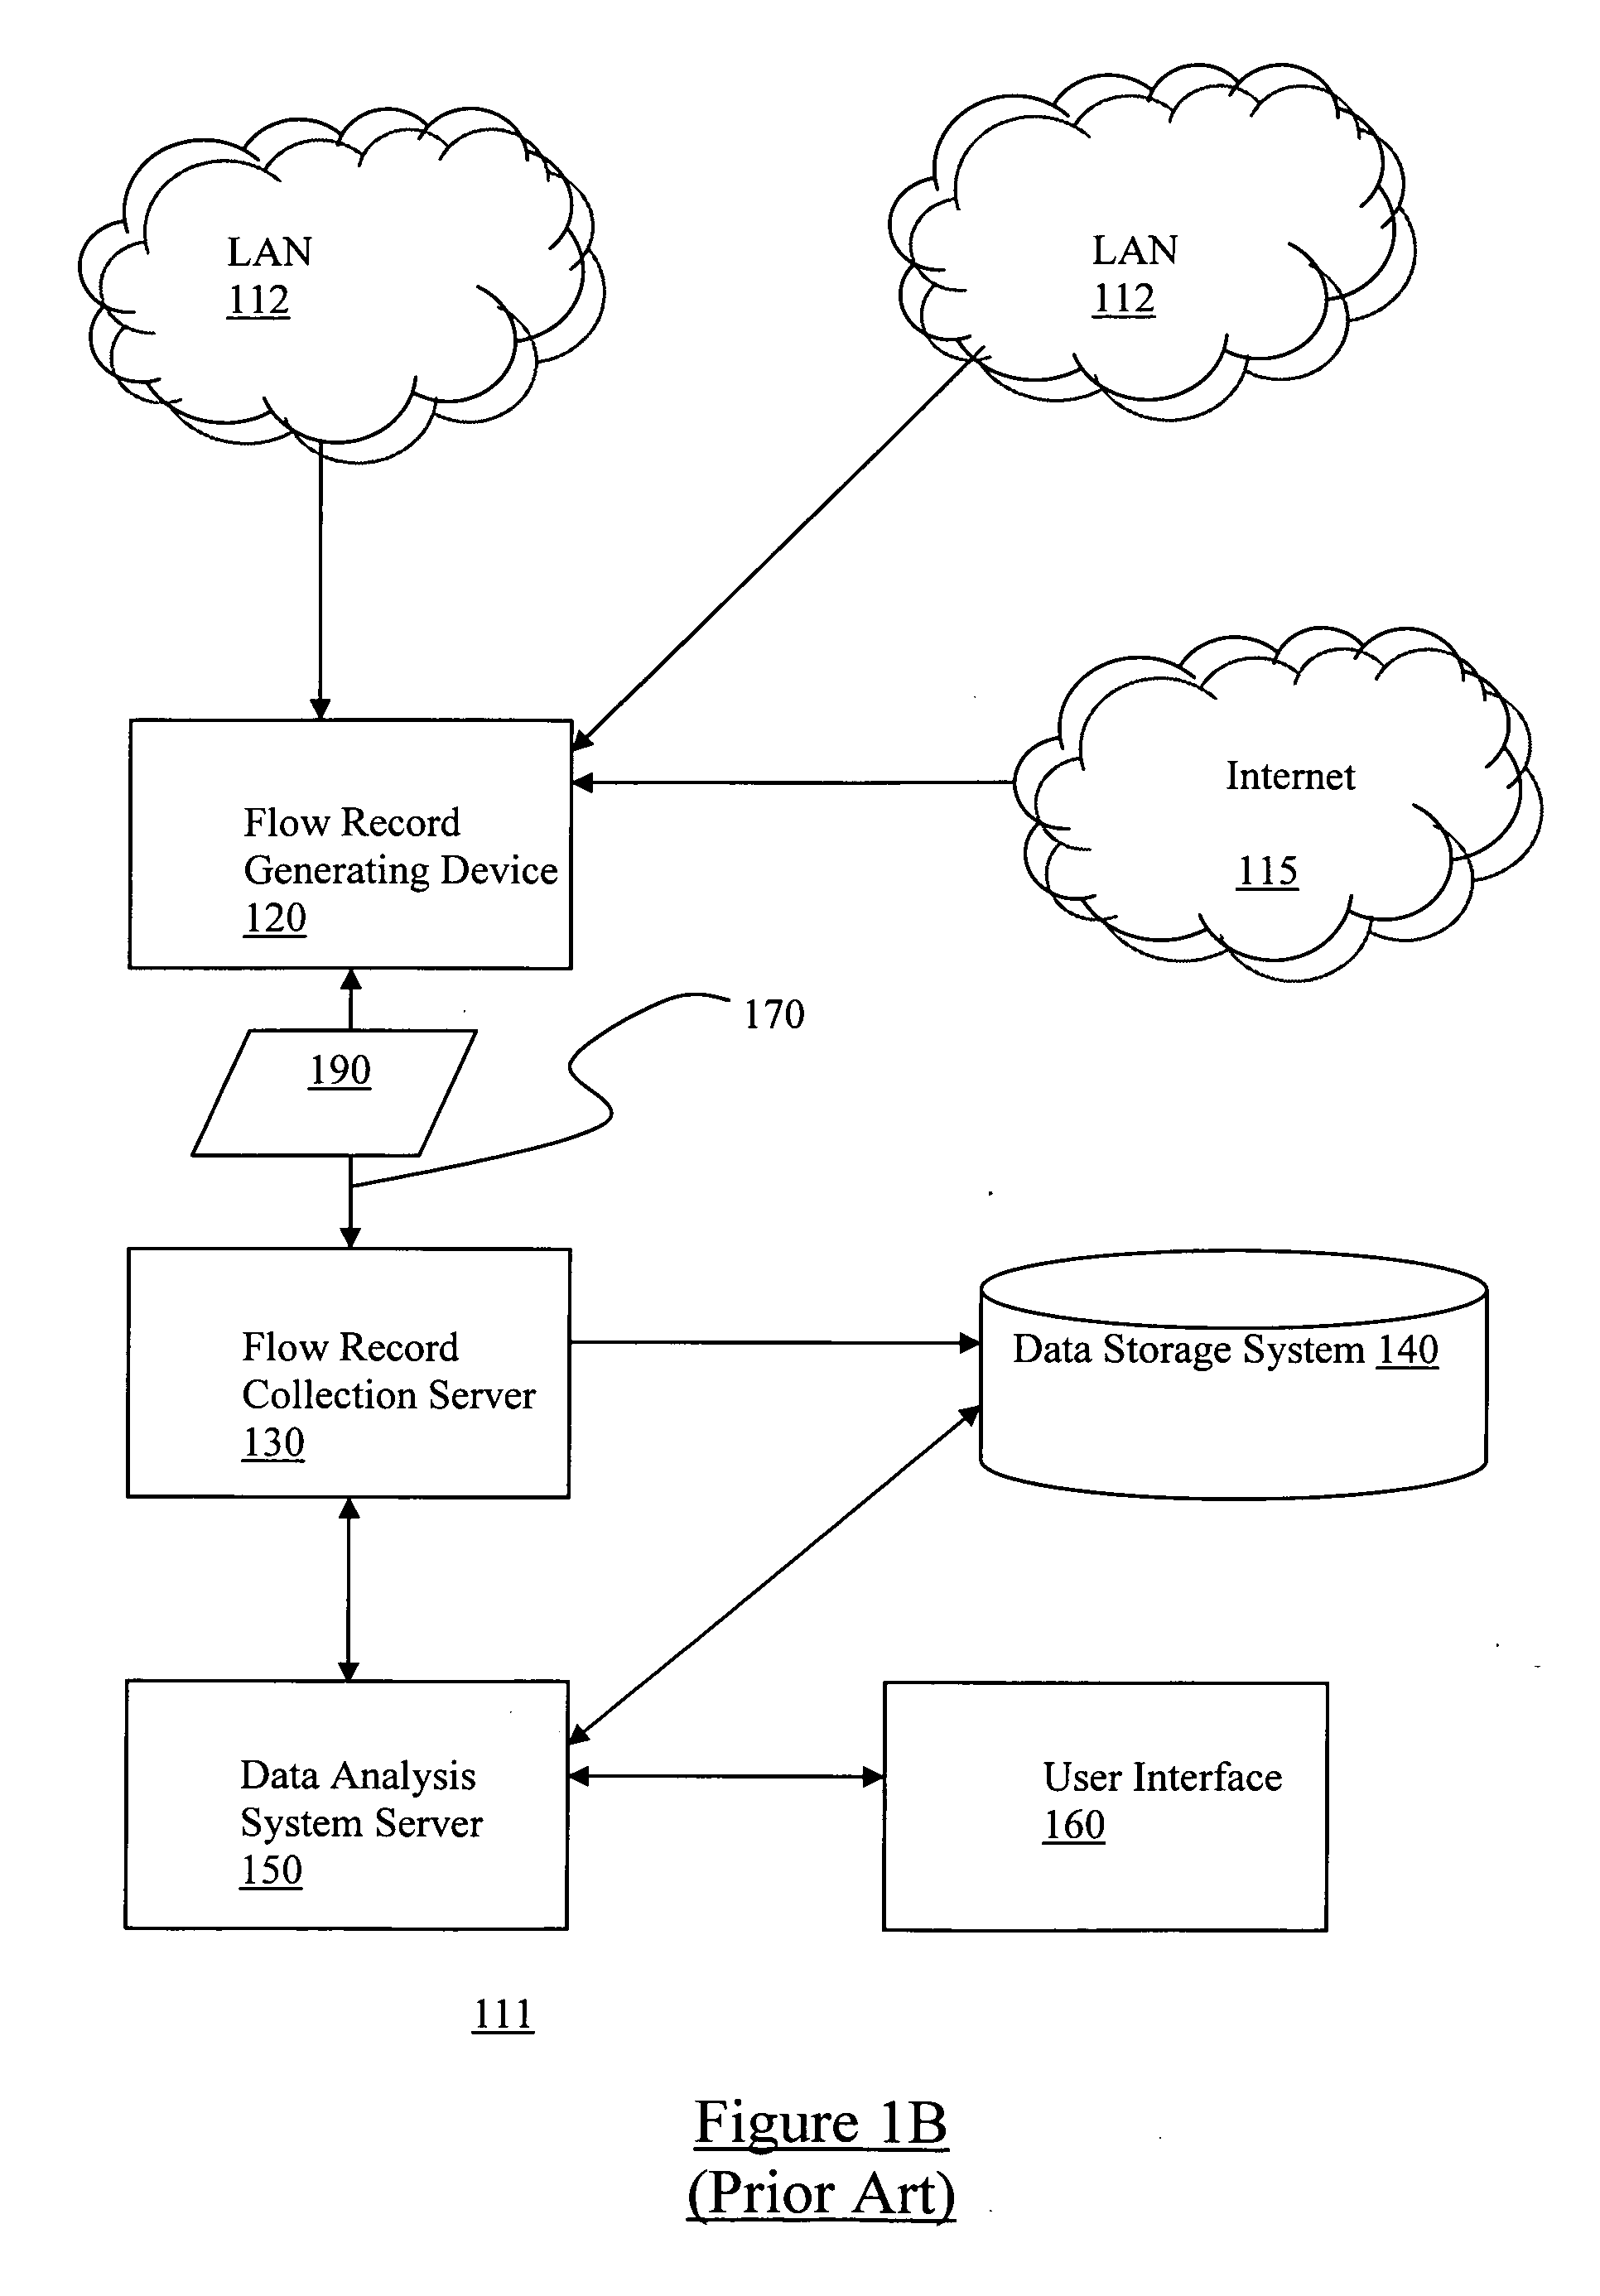 Method for configuring ACLS on network device based on flow information